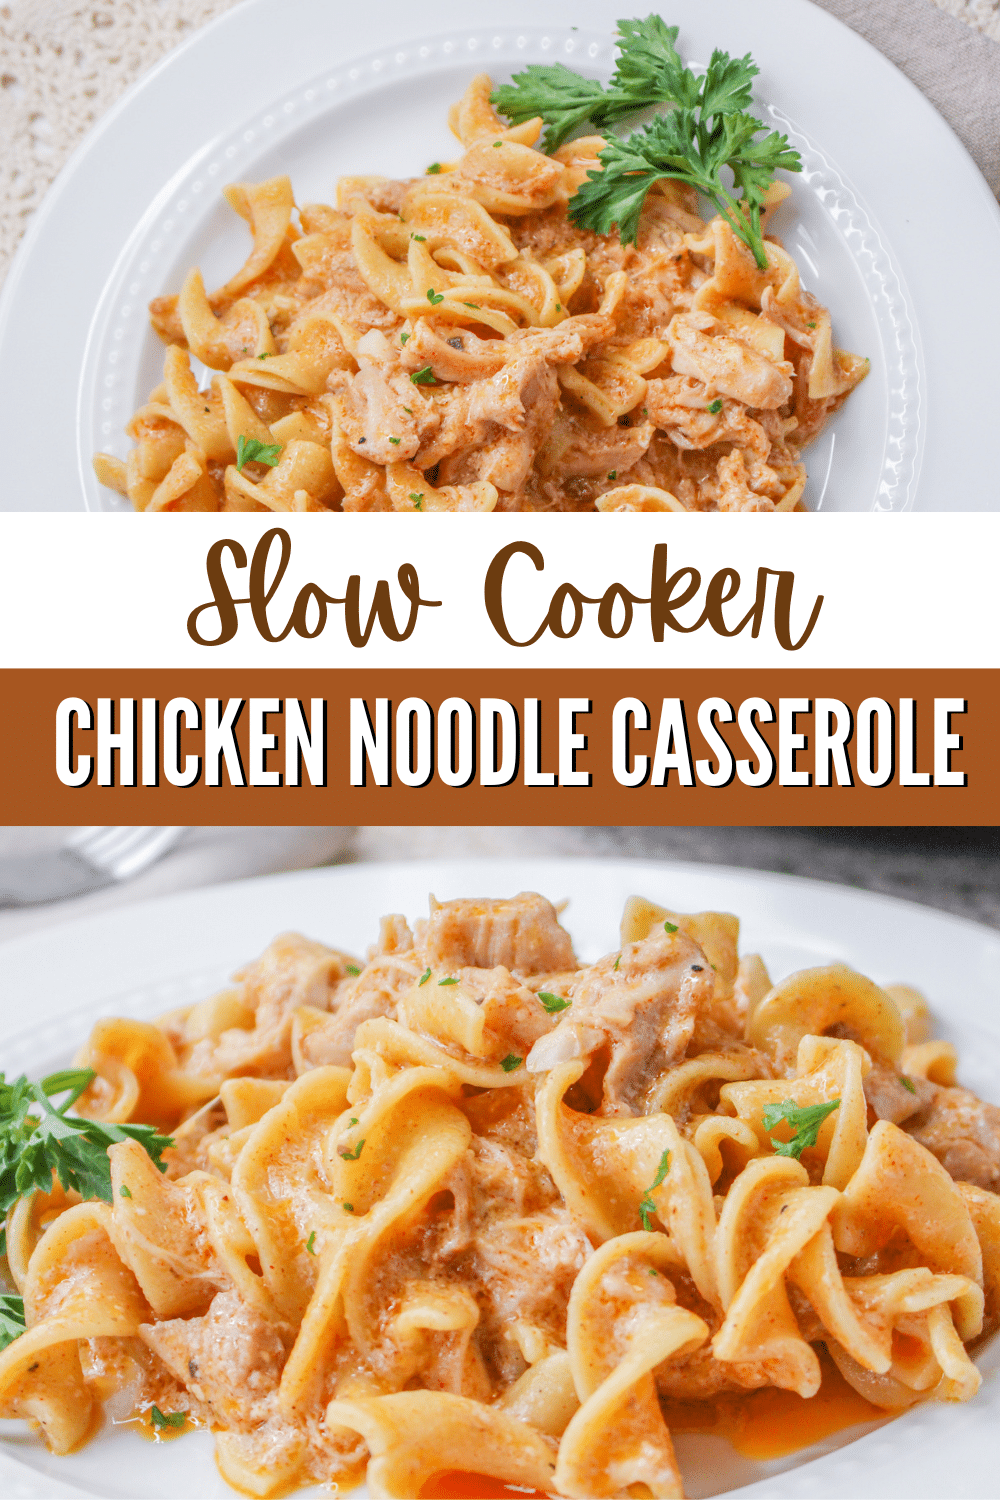 Chicken noodle casserole cooked in a slow cooker.